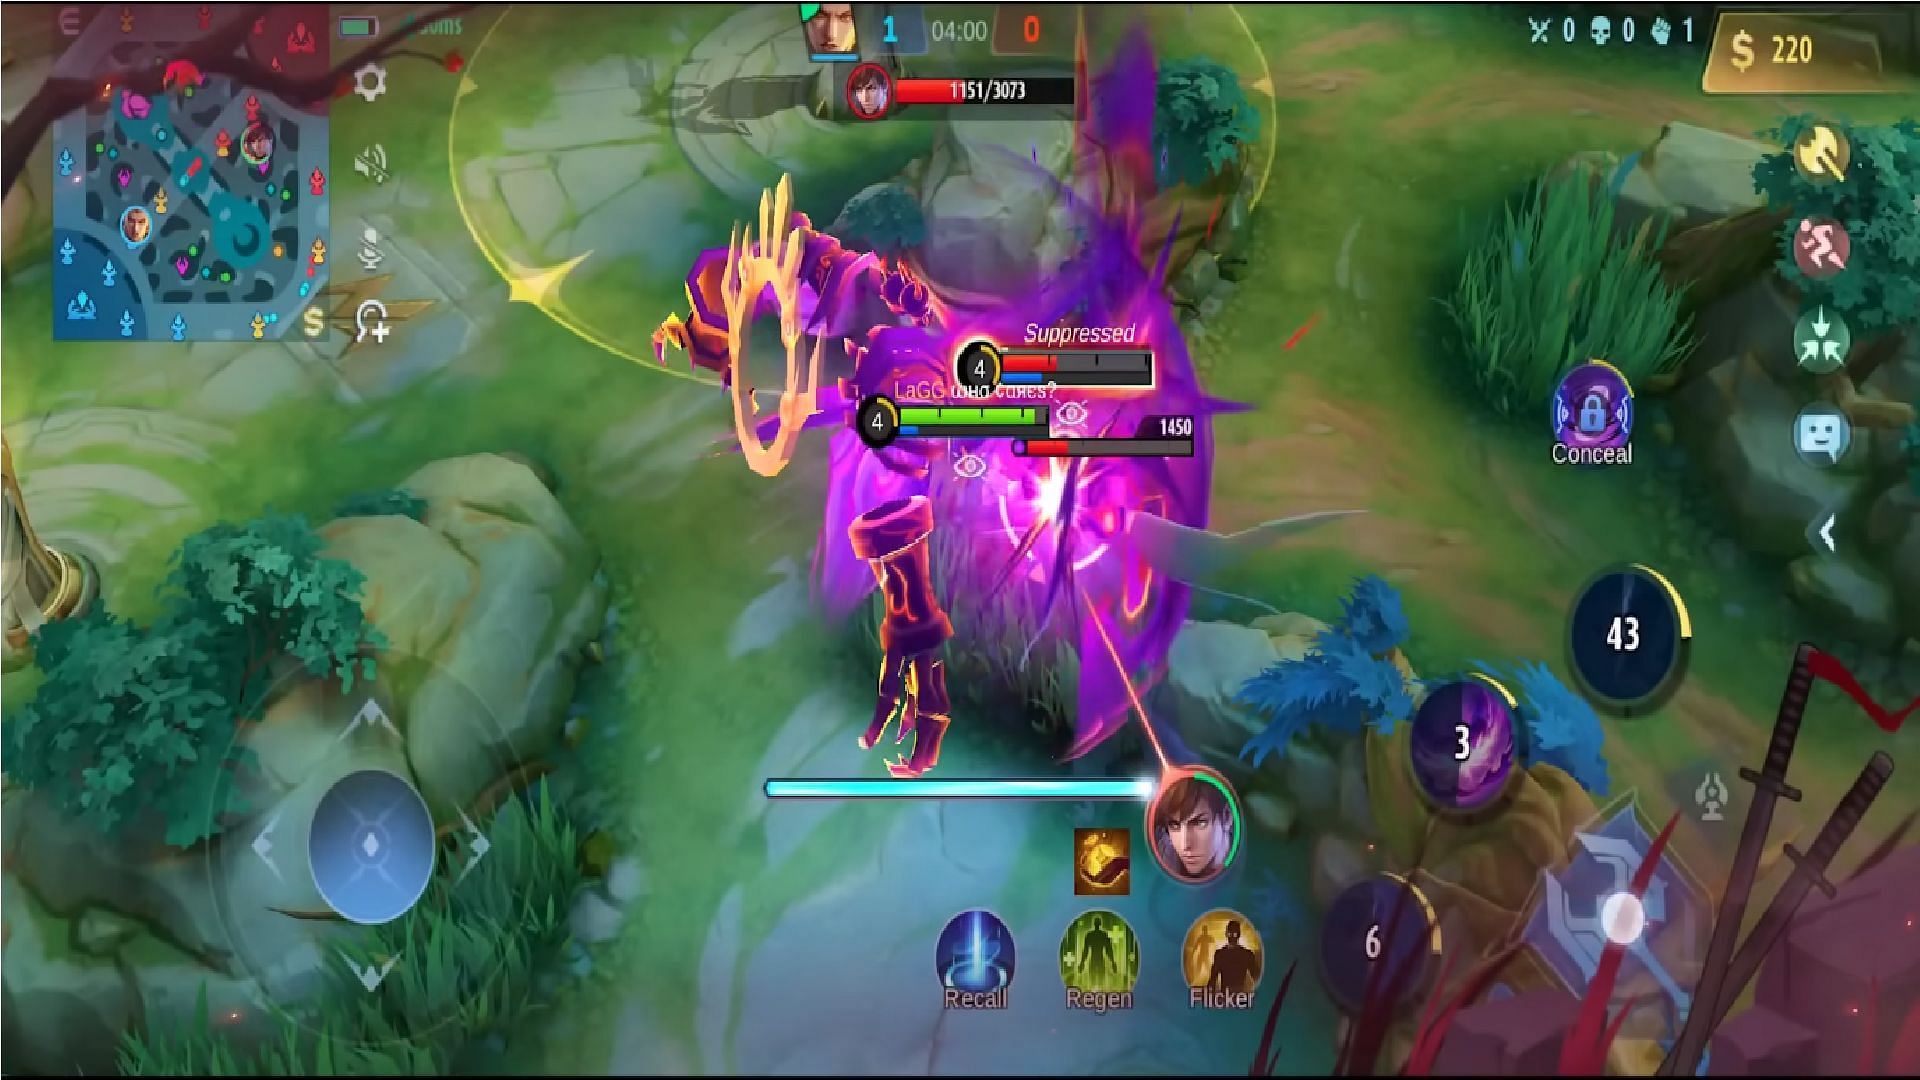 Jungler in Mobile Legends: Here's how to impact the game